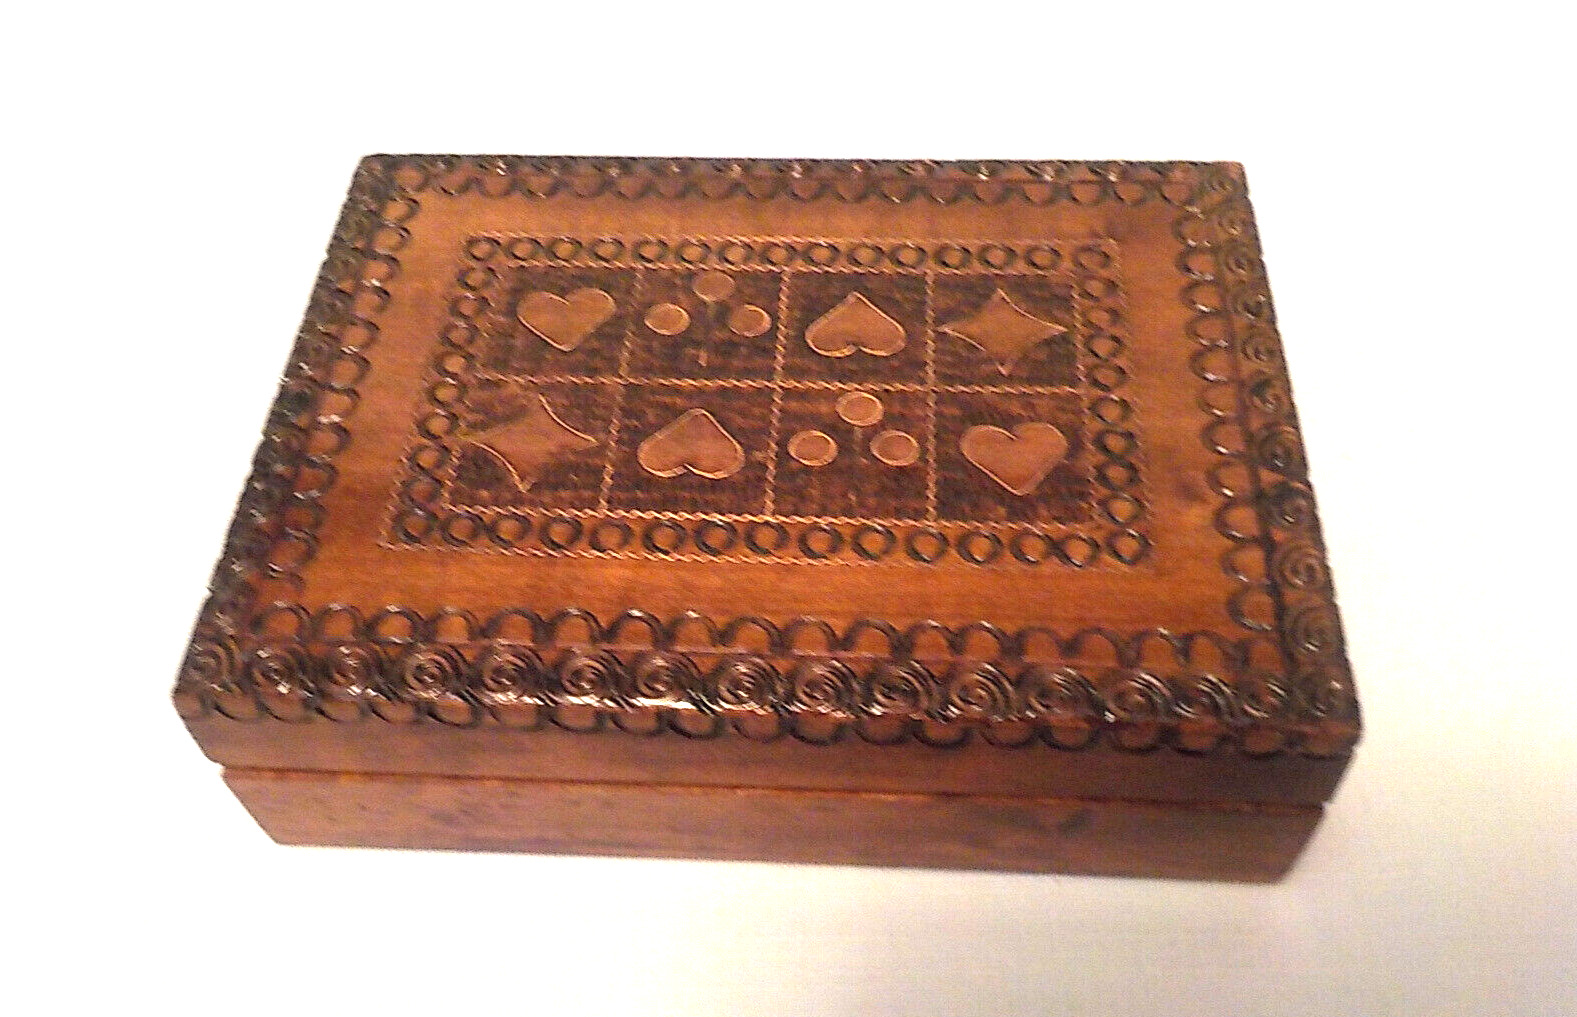 Vintage Handmade Carved 2002 Wood Box Holds 2 Decks Playing Cards Made in Poland